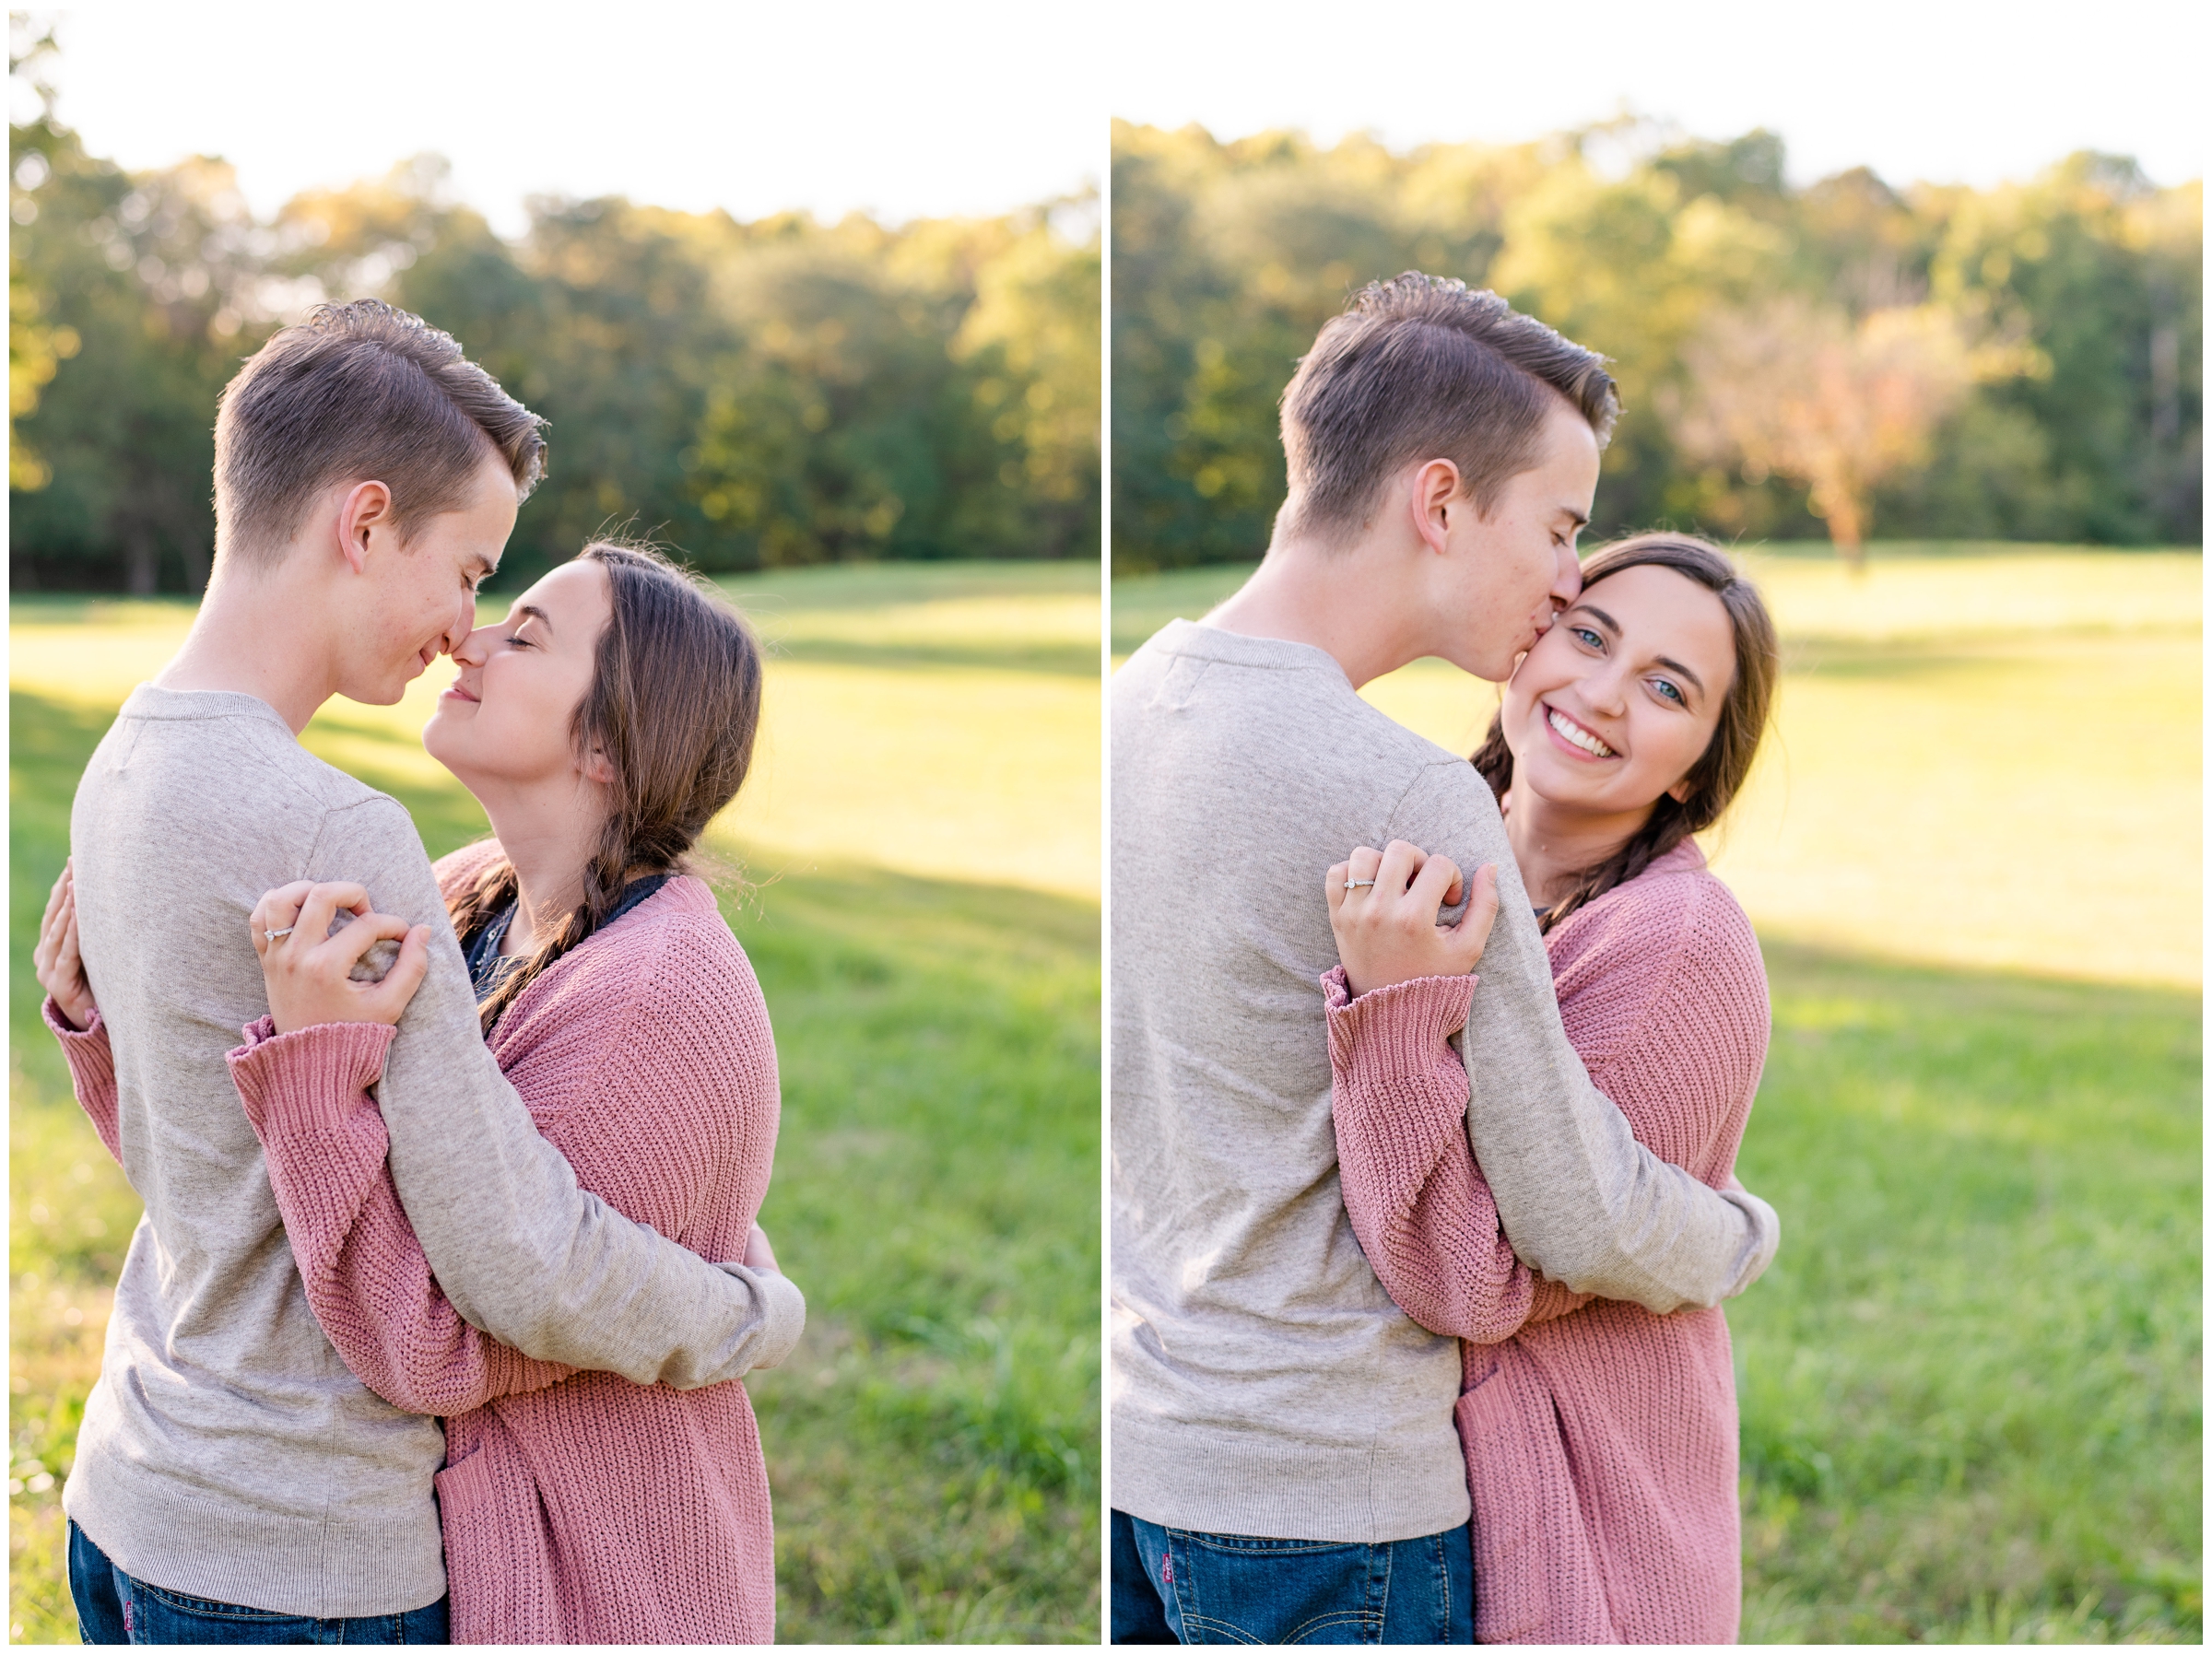 Fun Summer Engagement Session